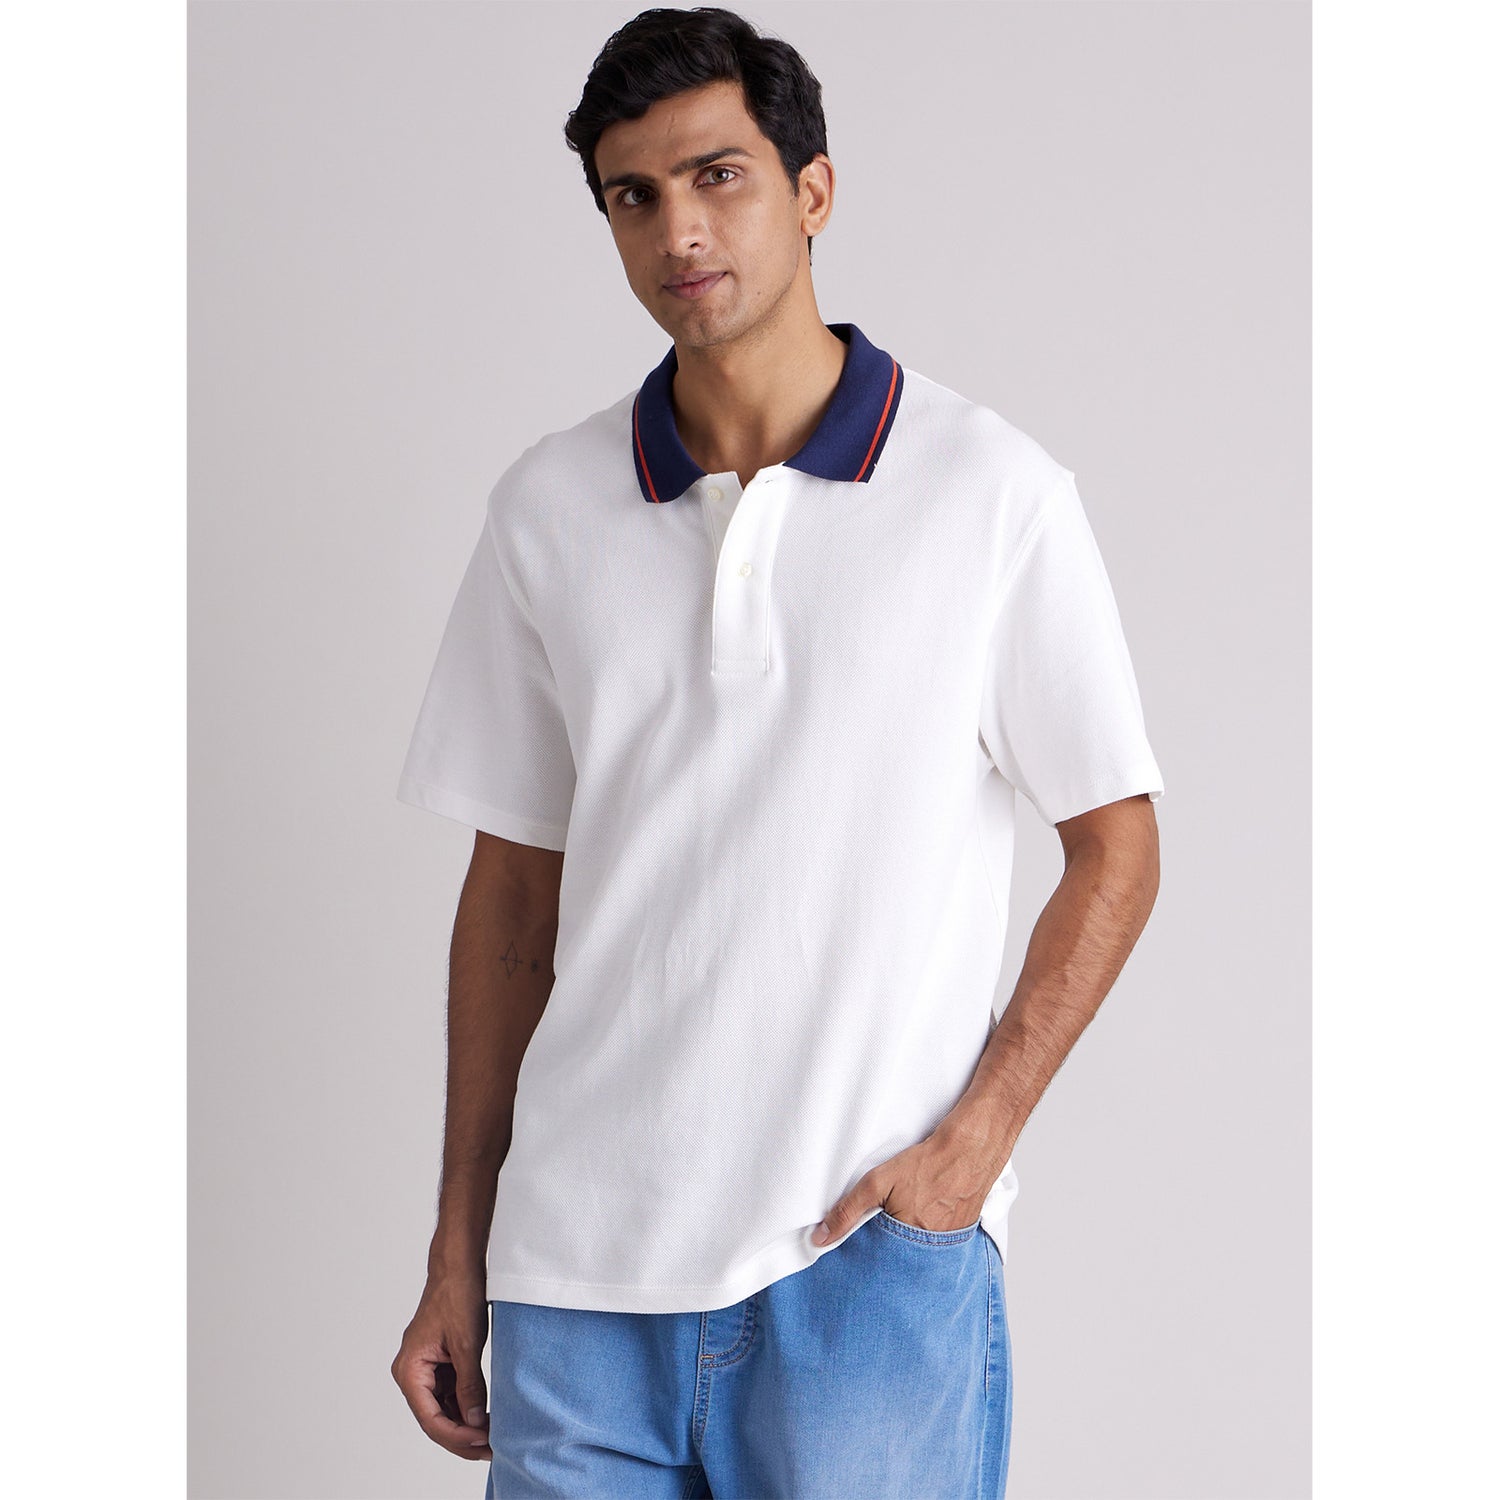 White Solid Short Sleeve Polo T-Shirt